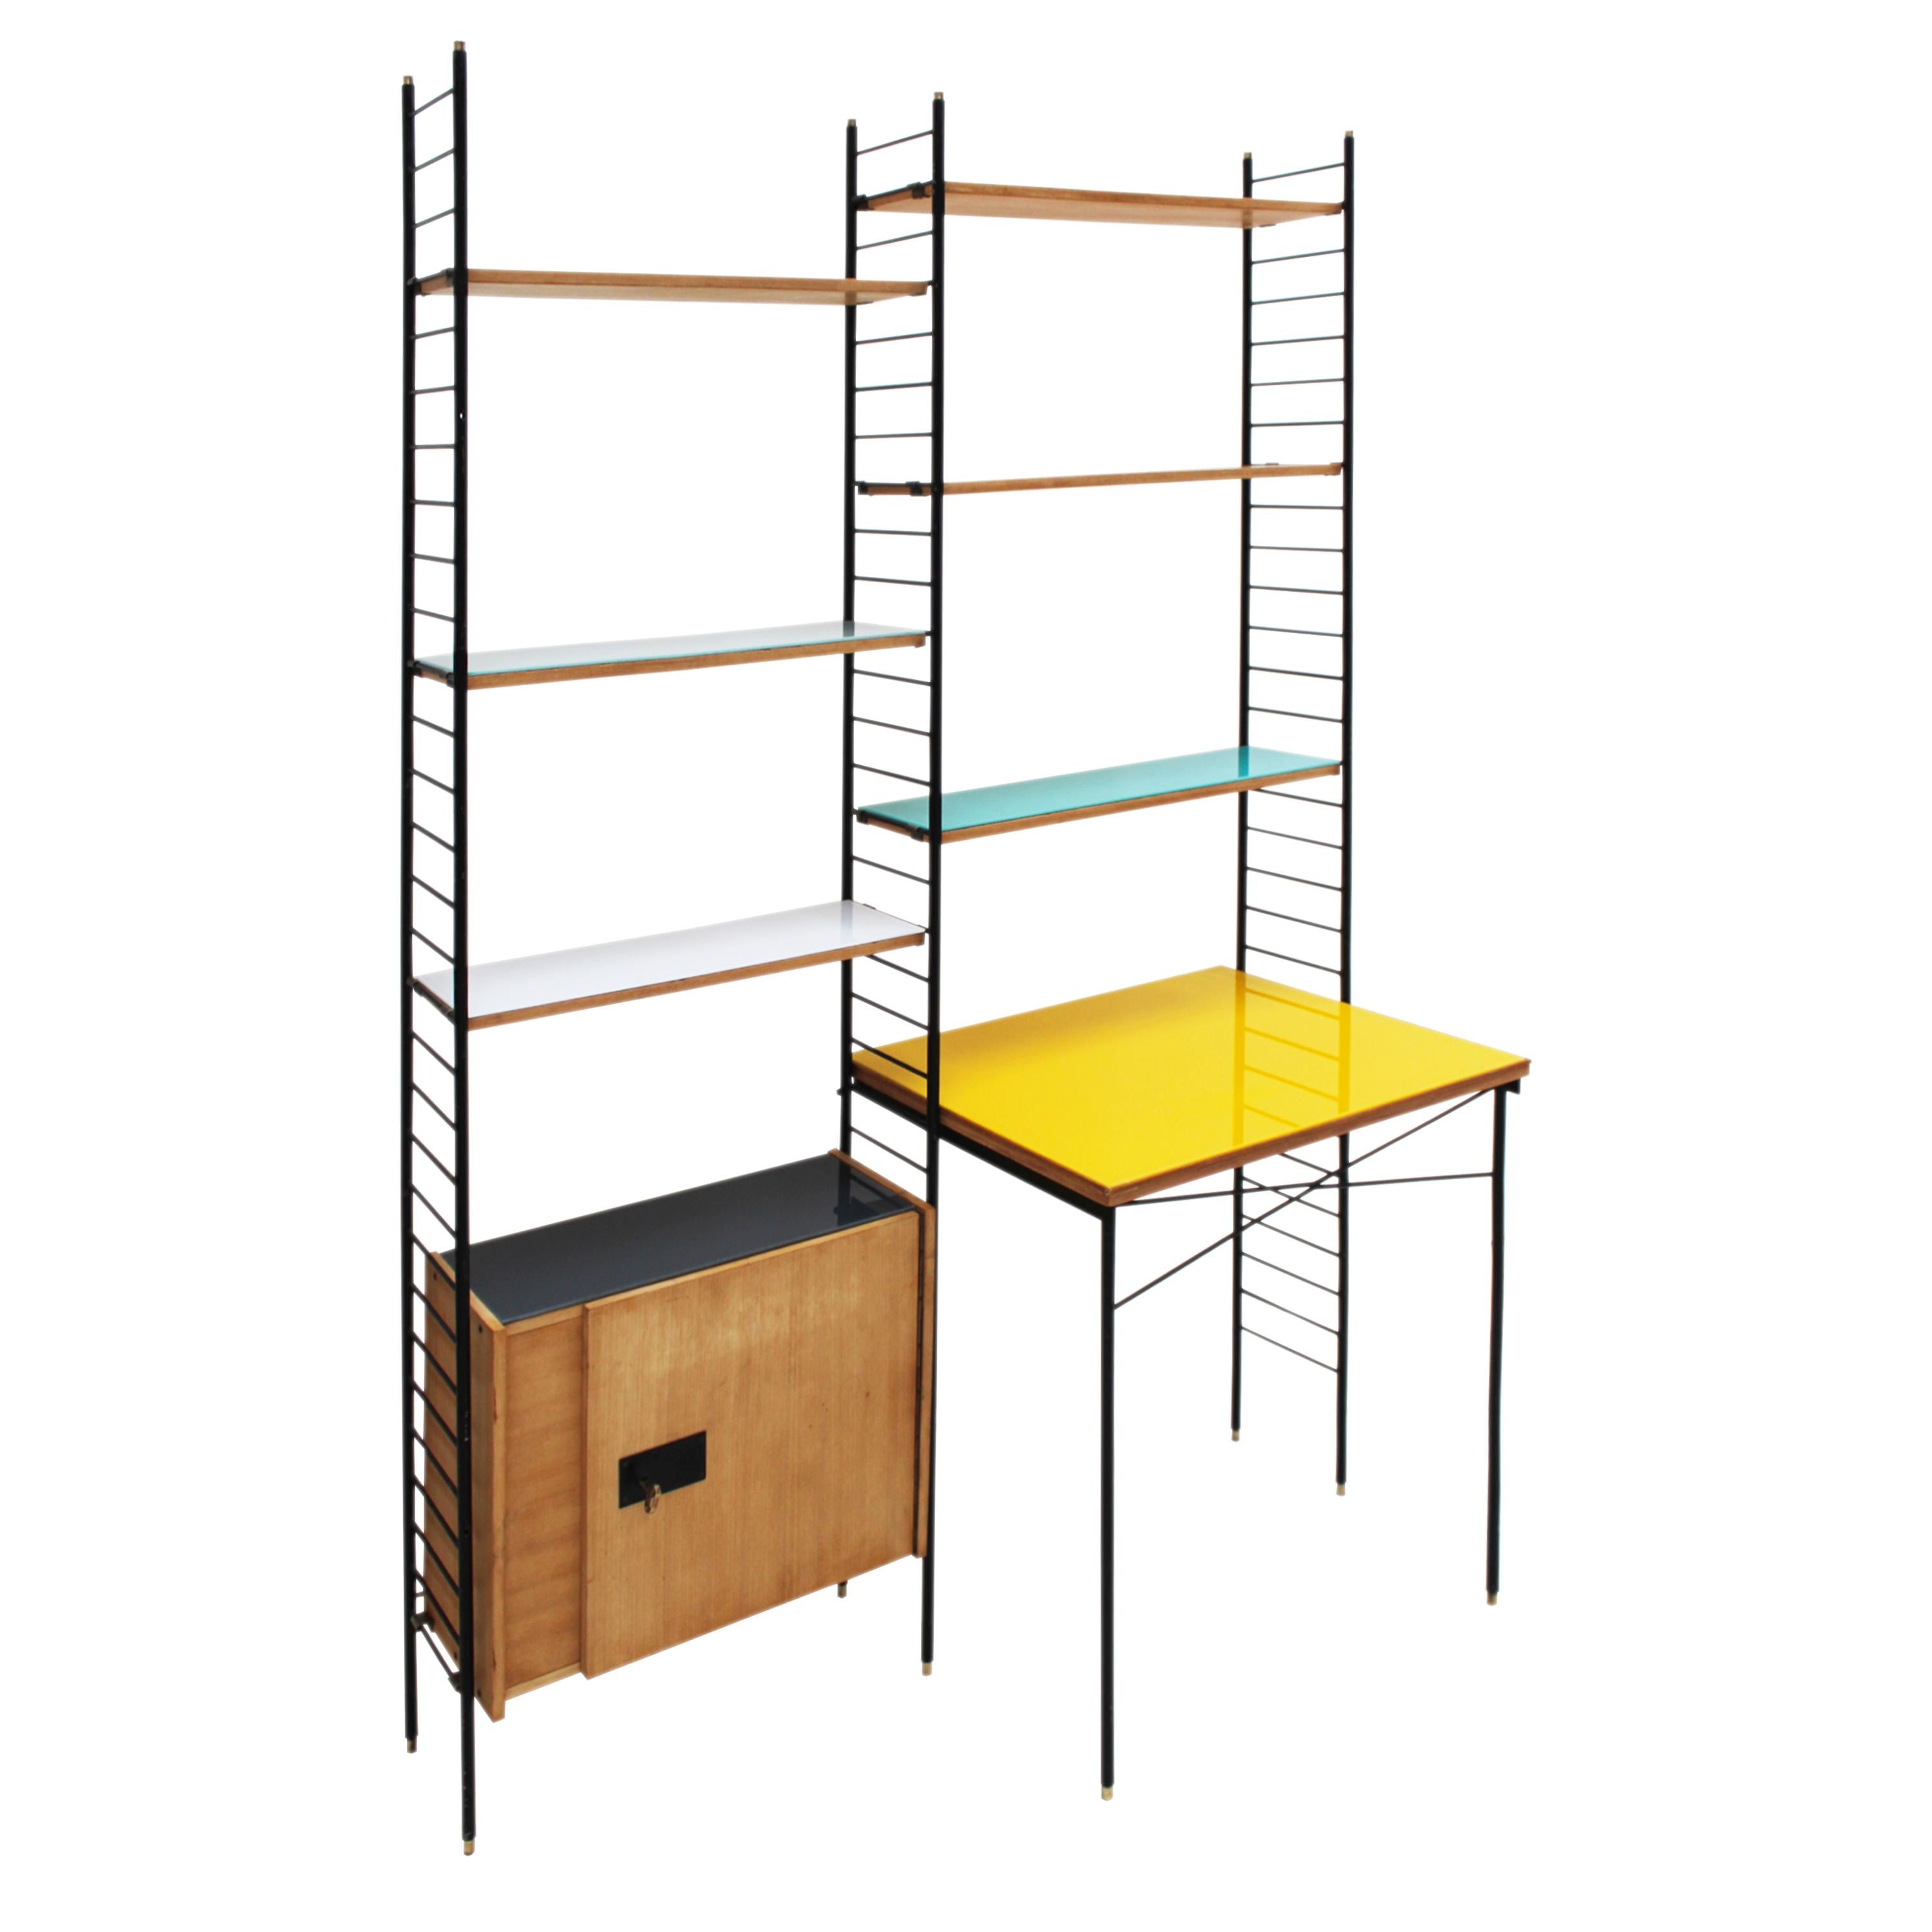 Modular Italian shelving String style, with integrated desk. It is composed of a black lacquered metal structure with brass details that supports the adjustable shelves, a storage module with a door and shelf, and the desk, which are made of birch